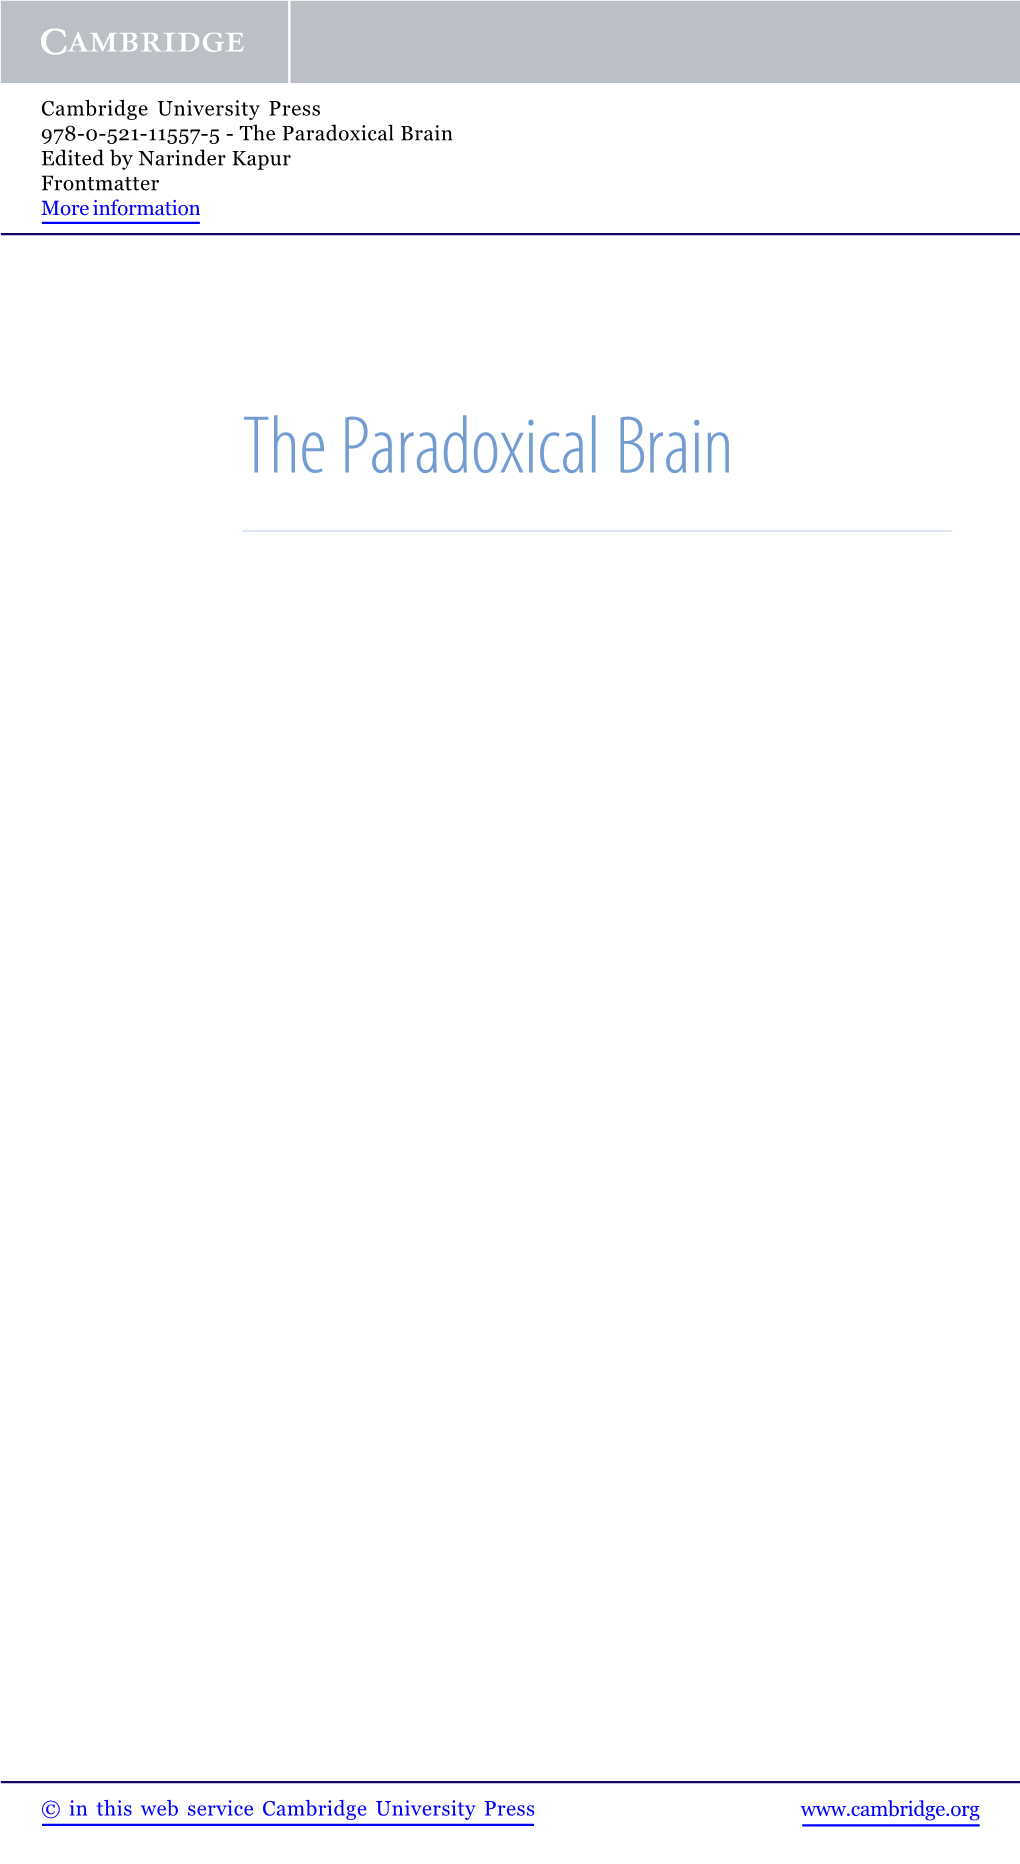 The Paradoxical Brain Edited by Narinder Kapur Frontmatter More Information